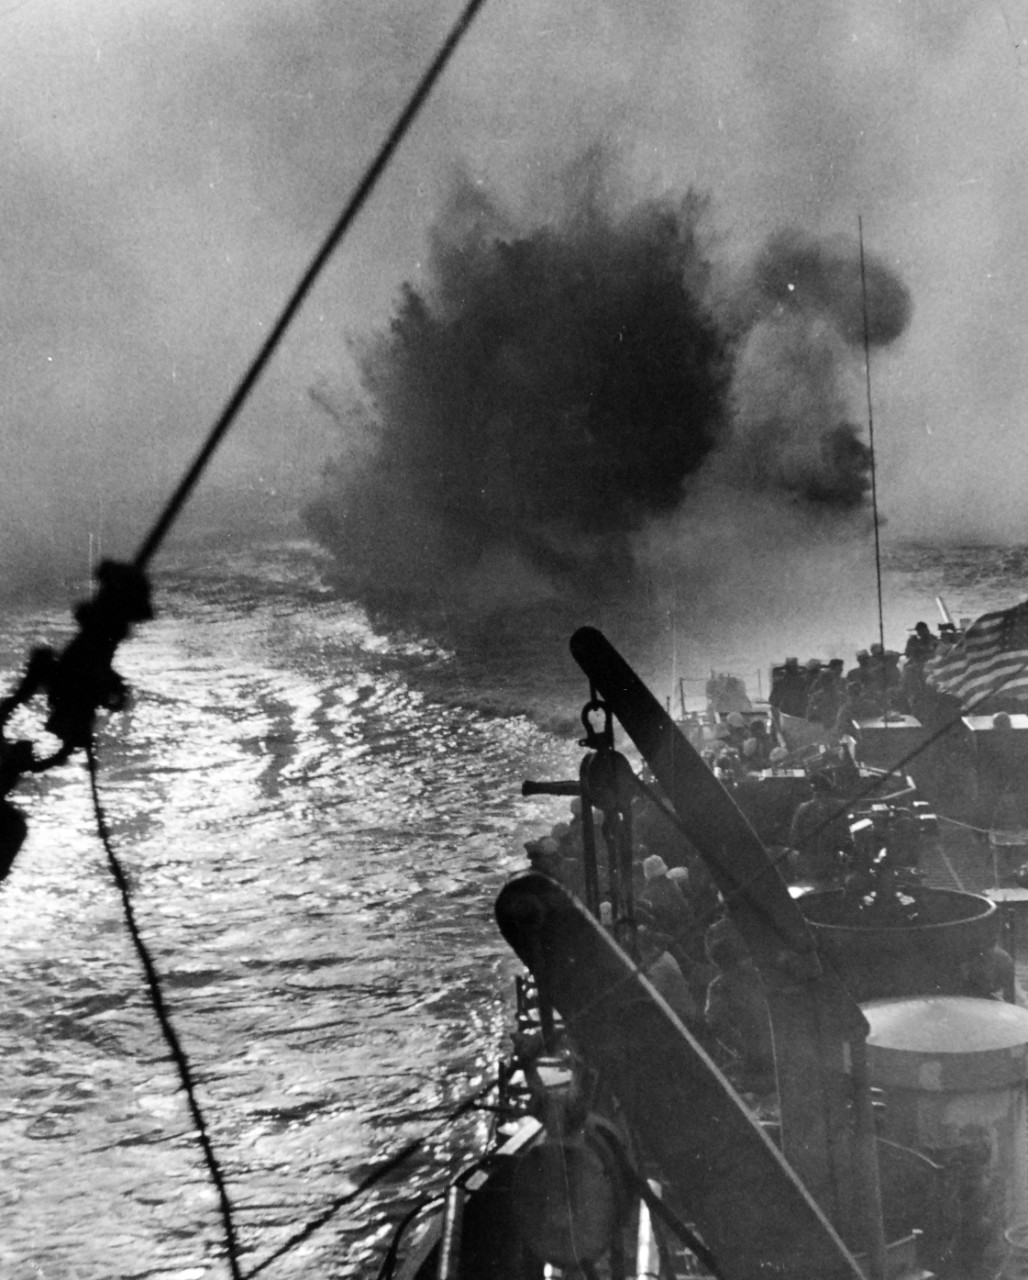 26-G-4555:  Sinking of German U-boat, U-853, May  1945.     A Depth Charge raises a geyser off the stern of a Coast Guard manned frigate off Point Judith, Rhode Island, on May 6, 1945. Teaming with three Navy vessels, the Coast Guard manned USS Moberly (PF-63) attacks U-853, which a few hours earlier had torpedoed an American collier with the loss of four lives.  Sound contact was made with the submarine by USS Atherton (DE-169) and patterns of depth charges were planted by all ships of the group until wreckage of the marauder boiled to the surface.       Official U.S. Coast Guard Photograph, now in the collections of the National Archives.  (2017/09/05). 